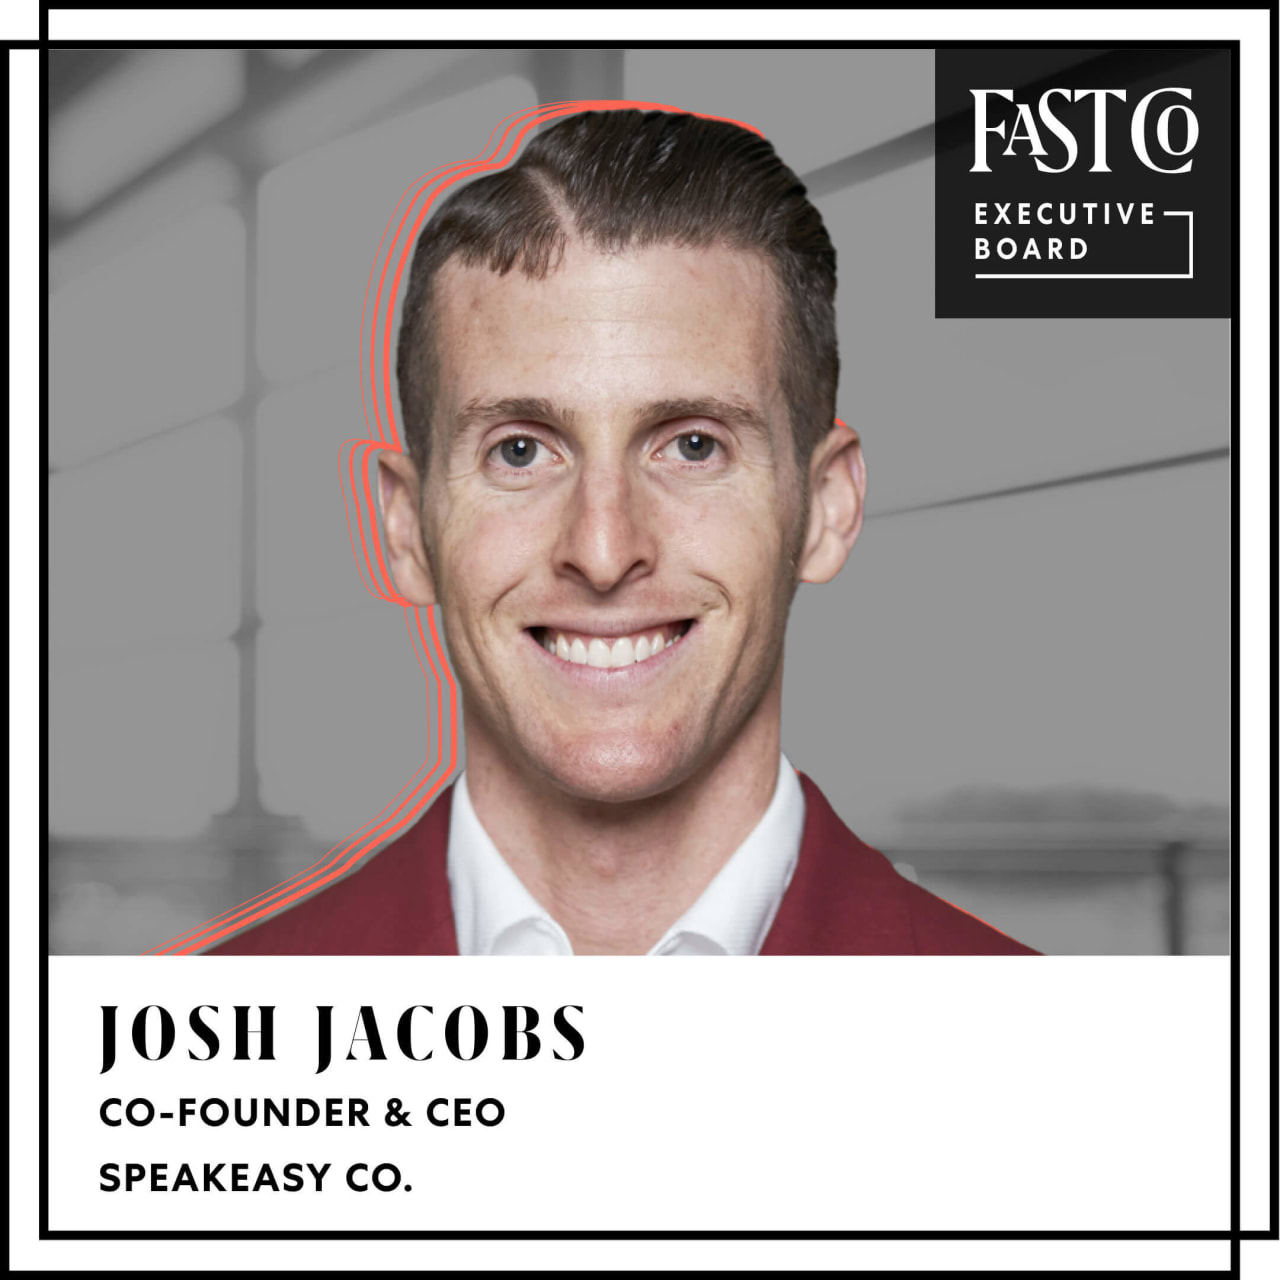 Josh Jacobs | Co-Founder & CEO - Speakeasy Co. | Fast Company